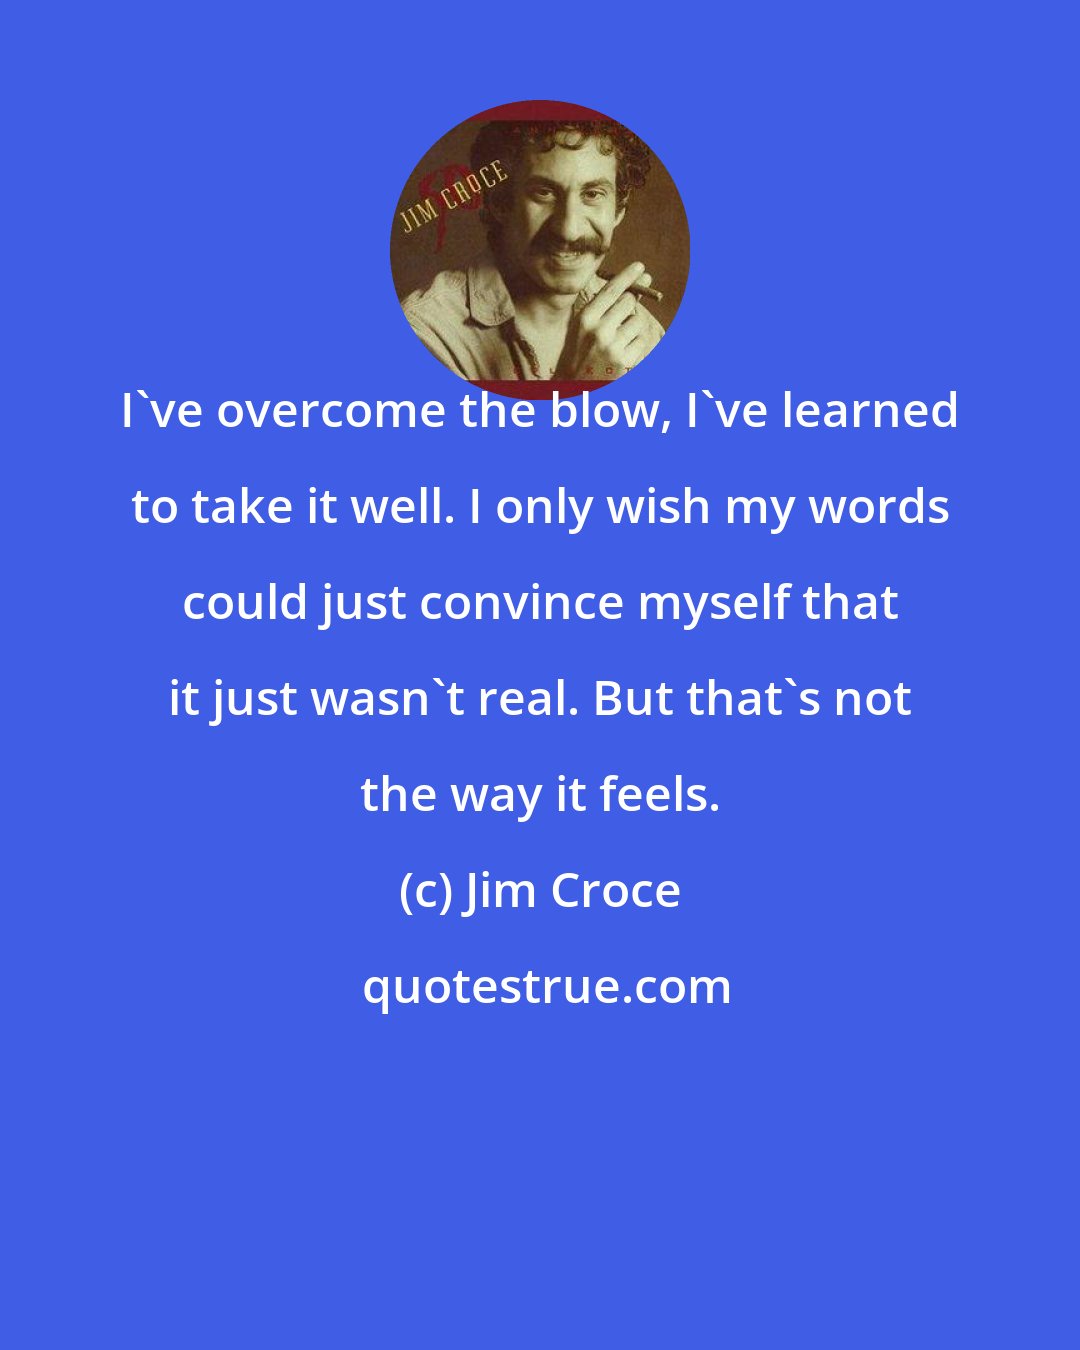 Jim Croce: I've overcome the blow, I've learned to take it well. I only wish my words could just convince myself that it just wasn't real. But that's not the way it feels.